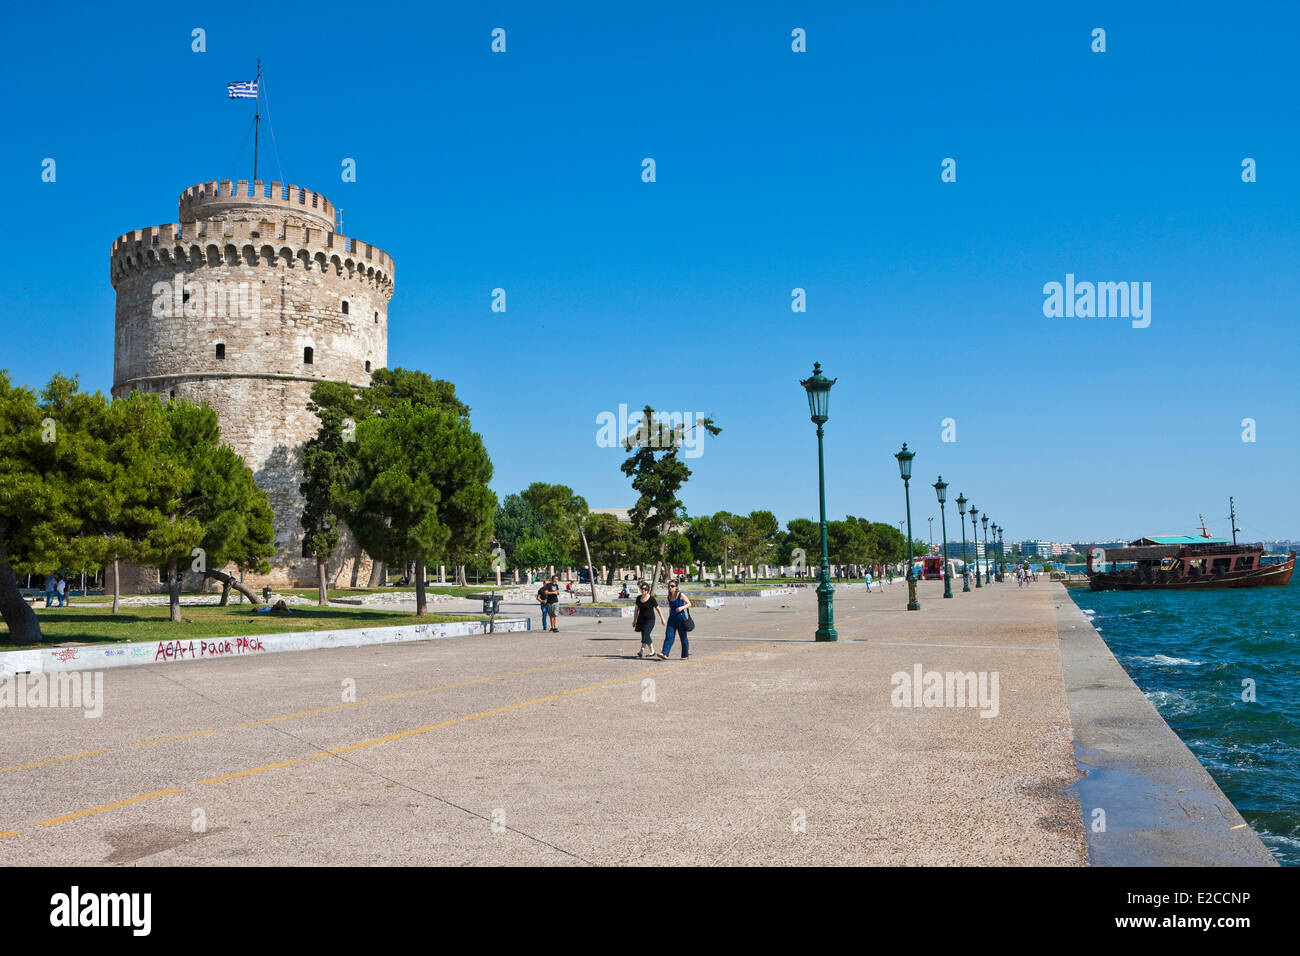 Greece, Macedonia, Thessaloniki, the seaside promenade Leoforos Nikis and the White Tower, the remains of the Venetian fortifications of the 15th century, used as a prison by the Ottomans, today the symbol of the city Stock Photo